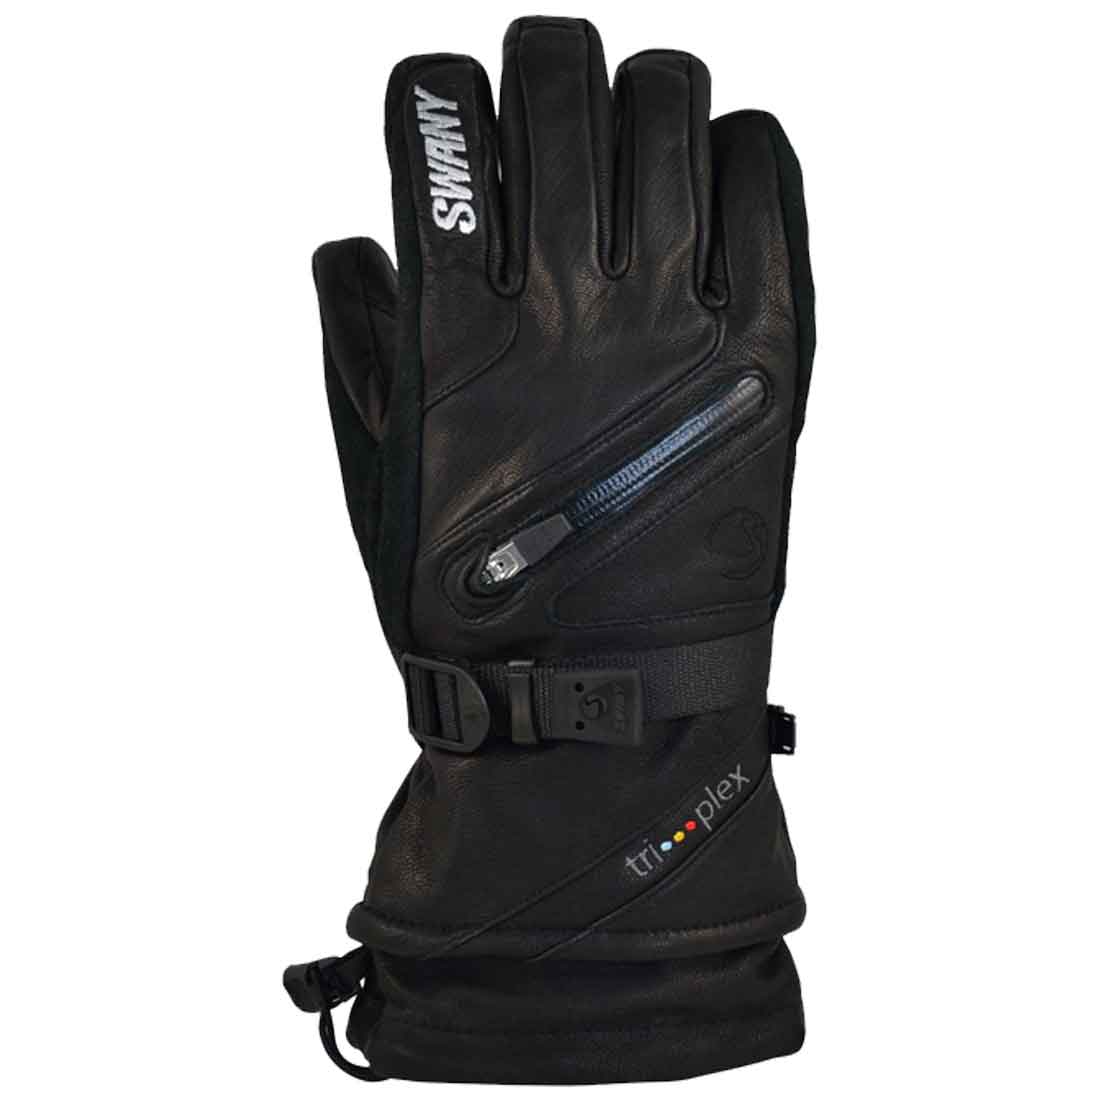 Swany X-Cell Glove 2.1 - Men's